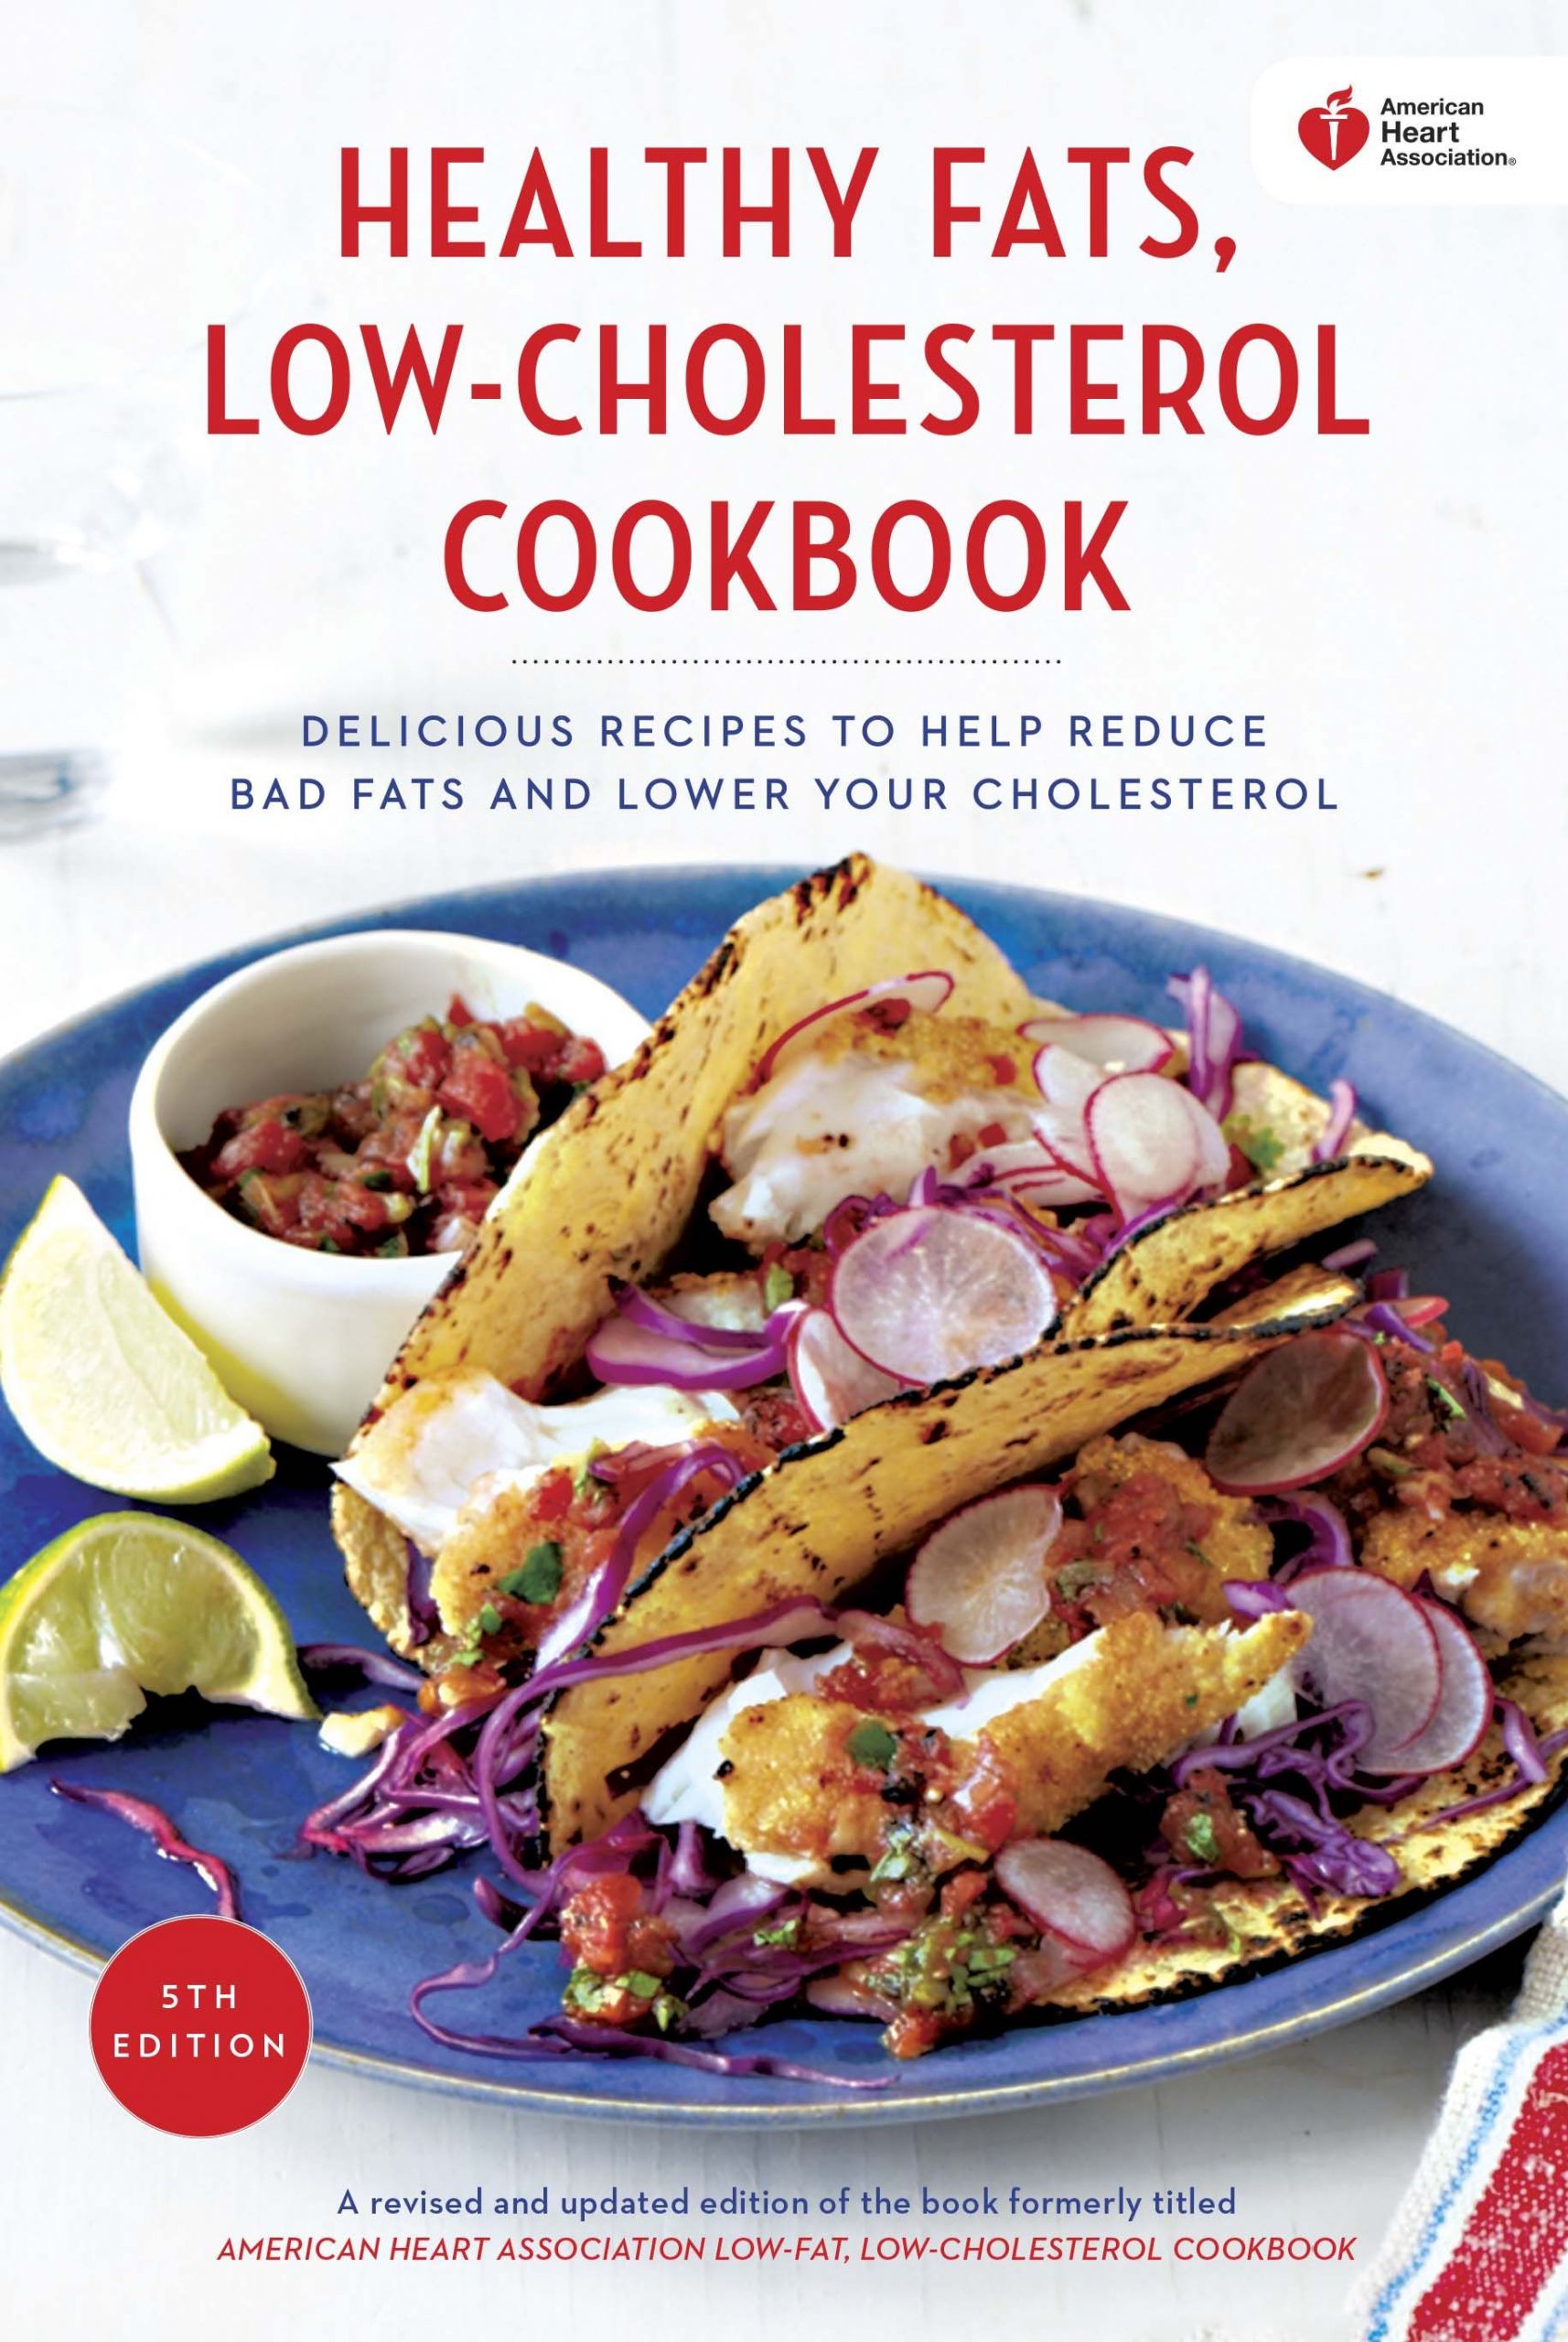 Low Cholesterol Food Recipes
 With over 200 heart healthy recipes our updated cookbook